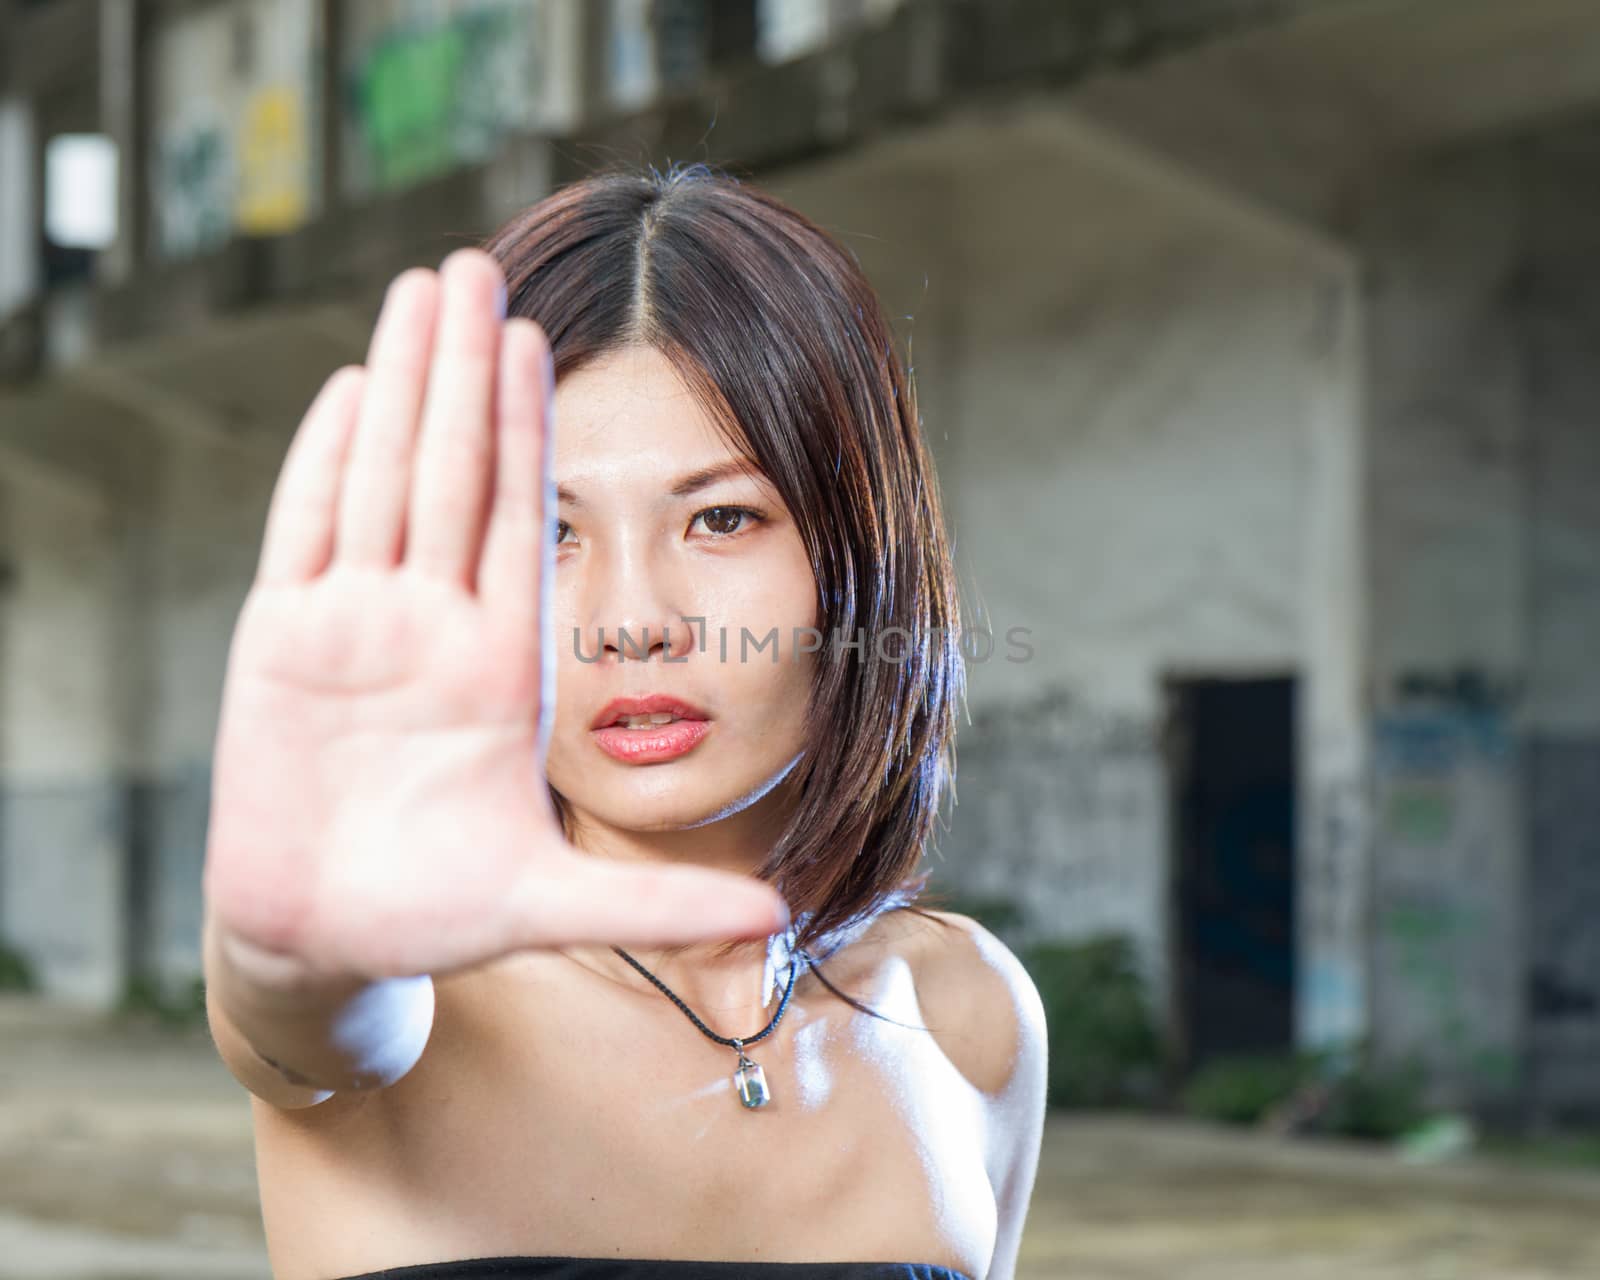 Chinese woman gesturing no with hand by imagesbykenny